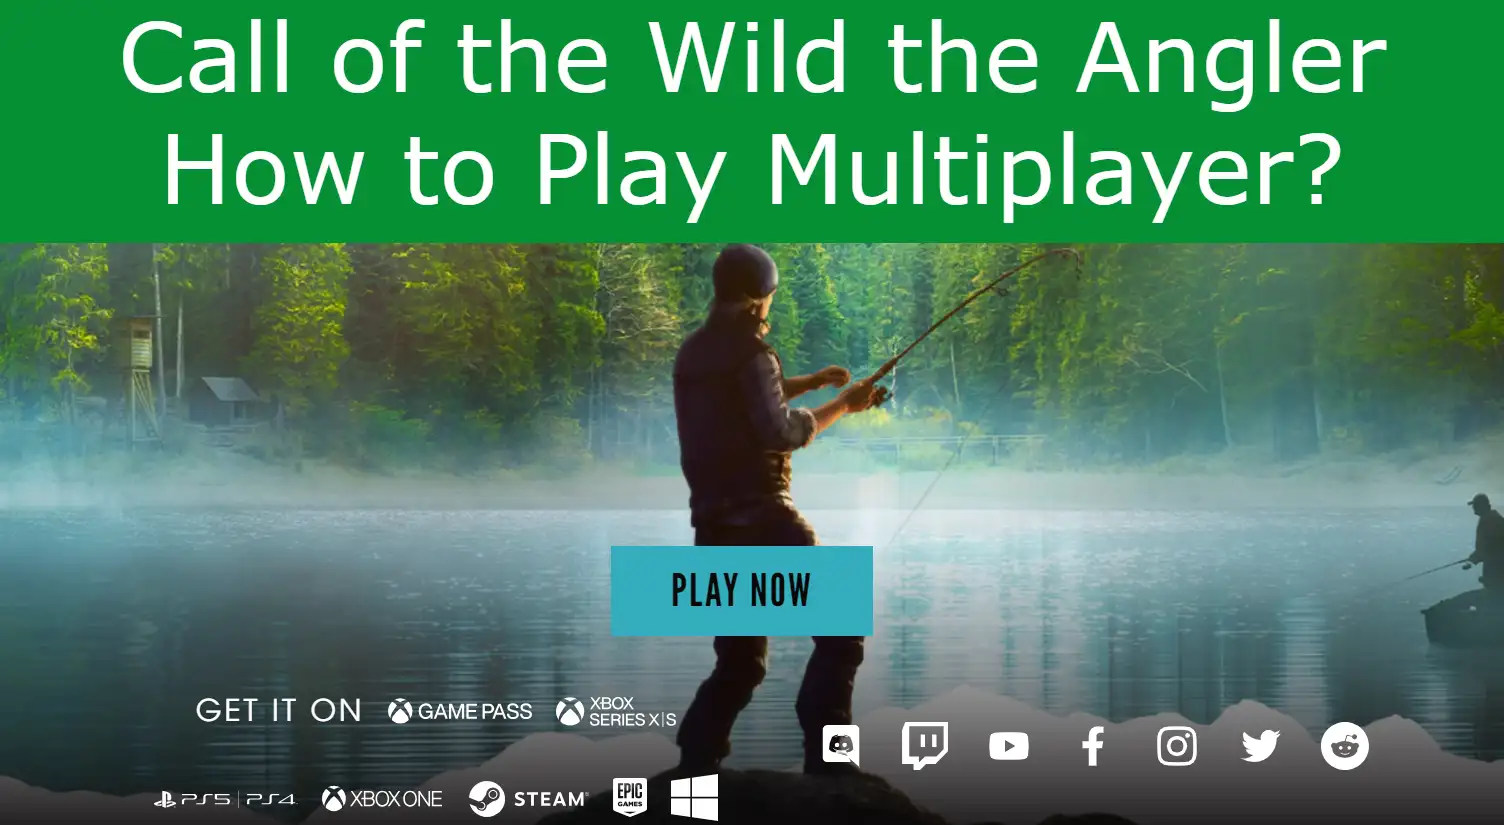 You are currently viewing Call of the Wild the Angler How to Play Multiplayer?